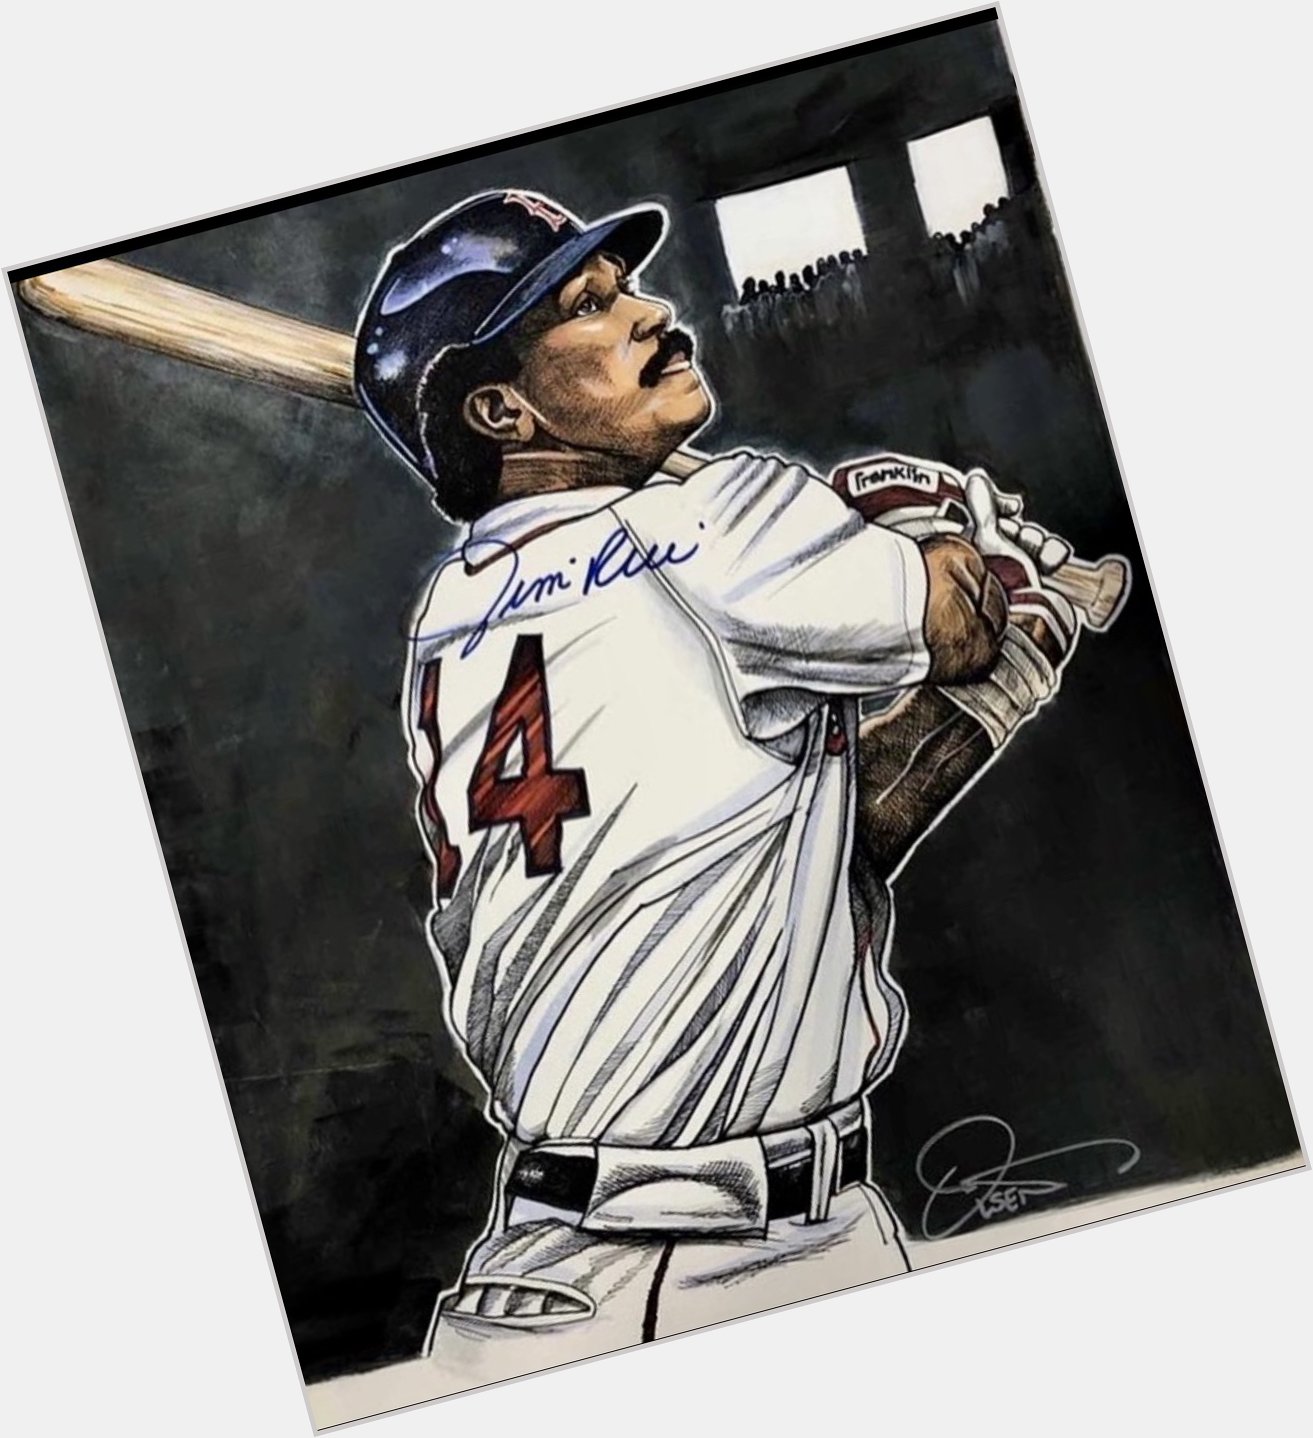 Happy Birthday to the great Jim Rice! My portrait of the Hall of Fame left fielder 